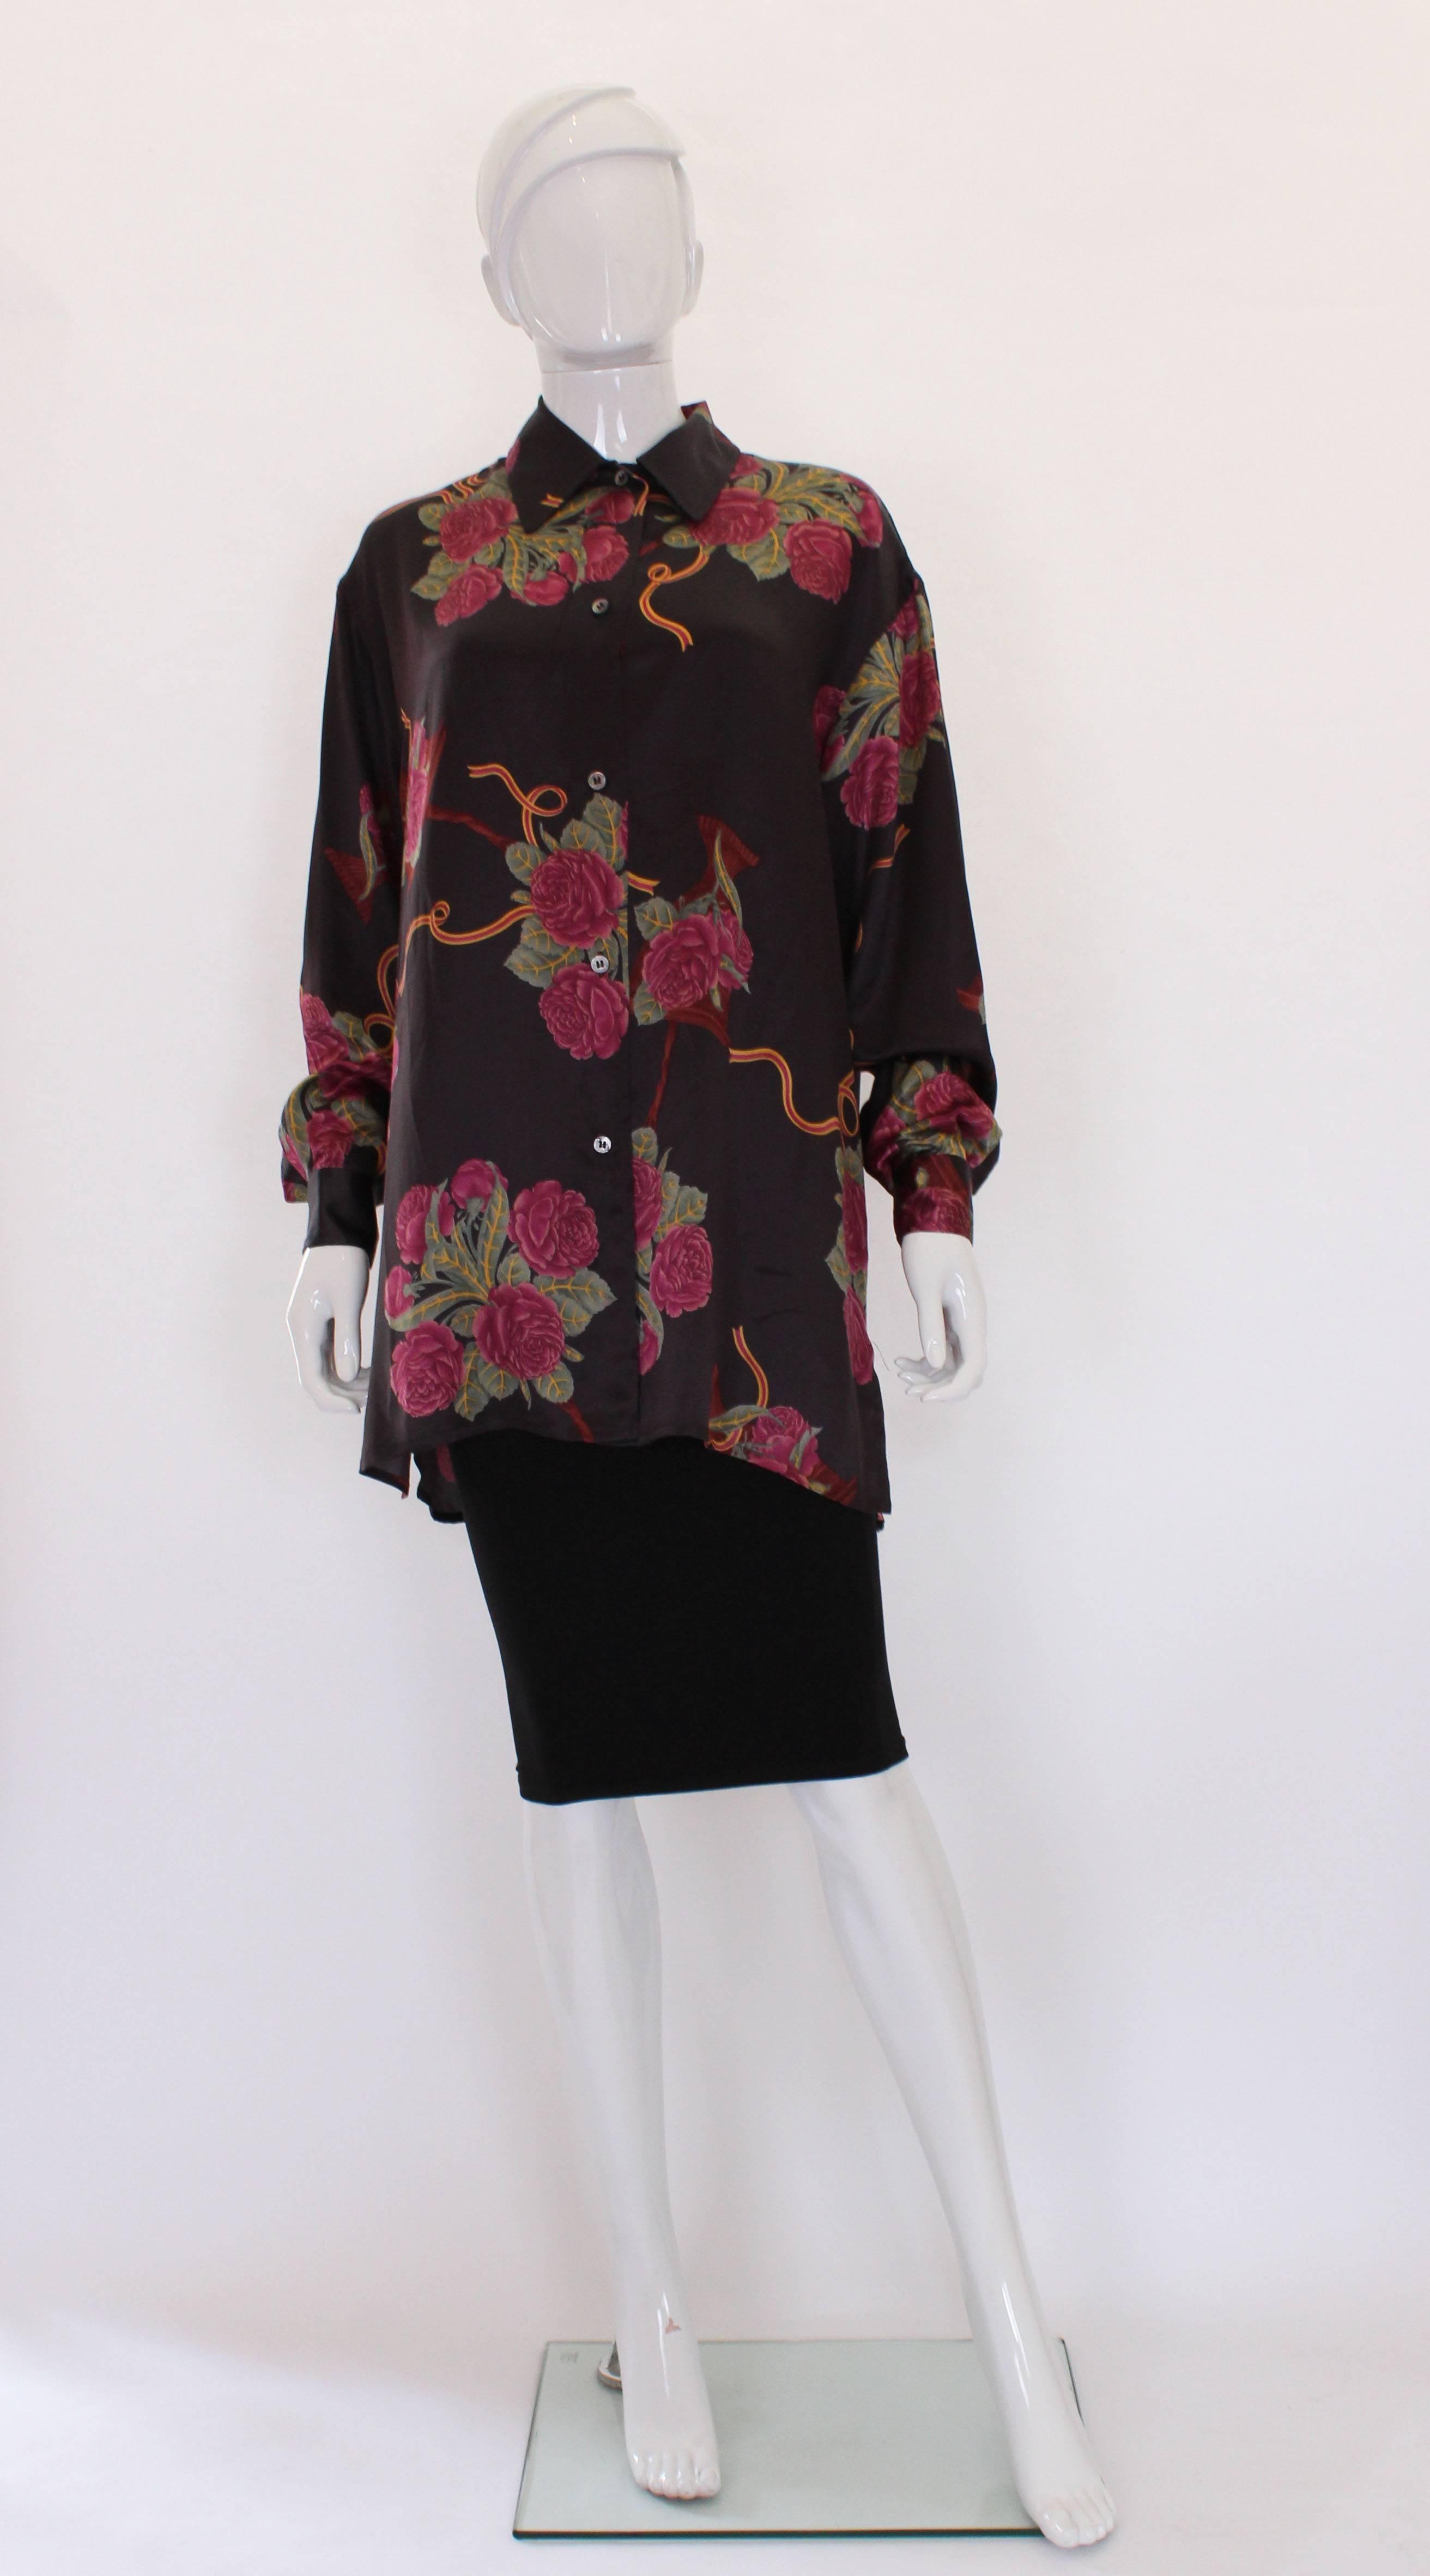 A great silk overshirt by Salvatore Ferragamo.This shirt is in a beautiful silk, with a brown background and pink floral print.The shirt has a one button cuff, and 5 button opening at the front.All the buttons are stamped Ferragamo, and the shirt